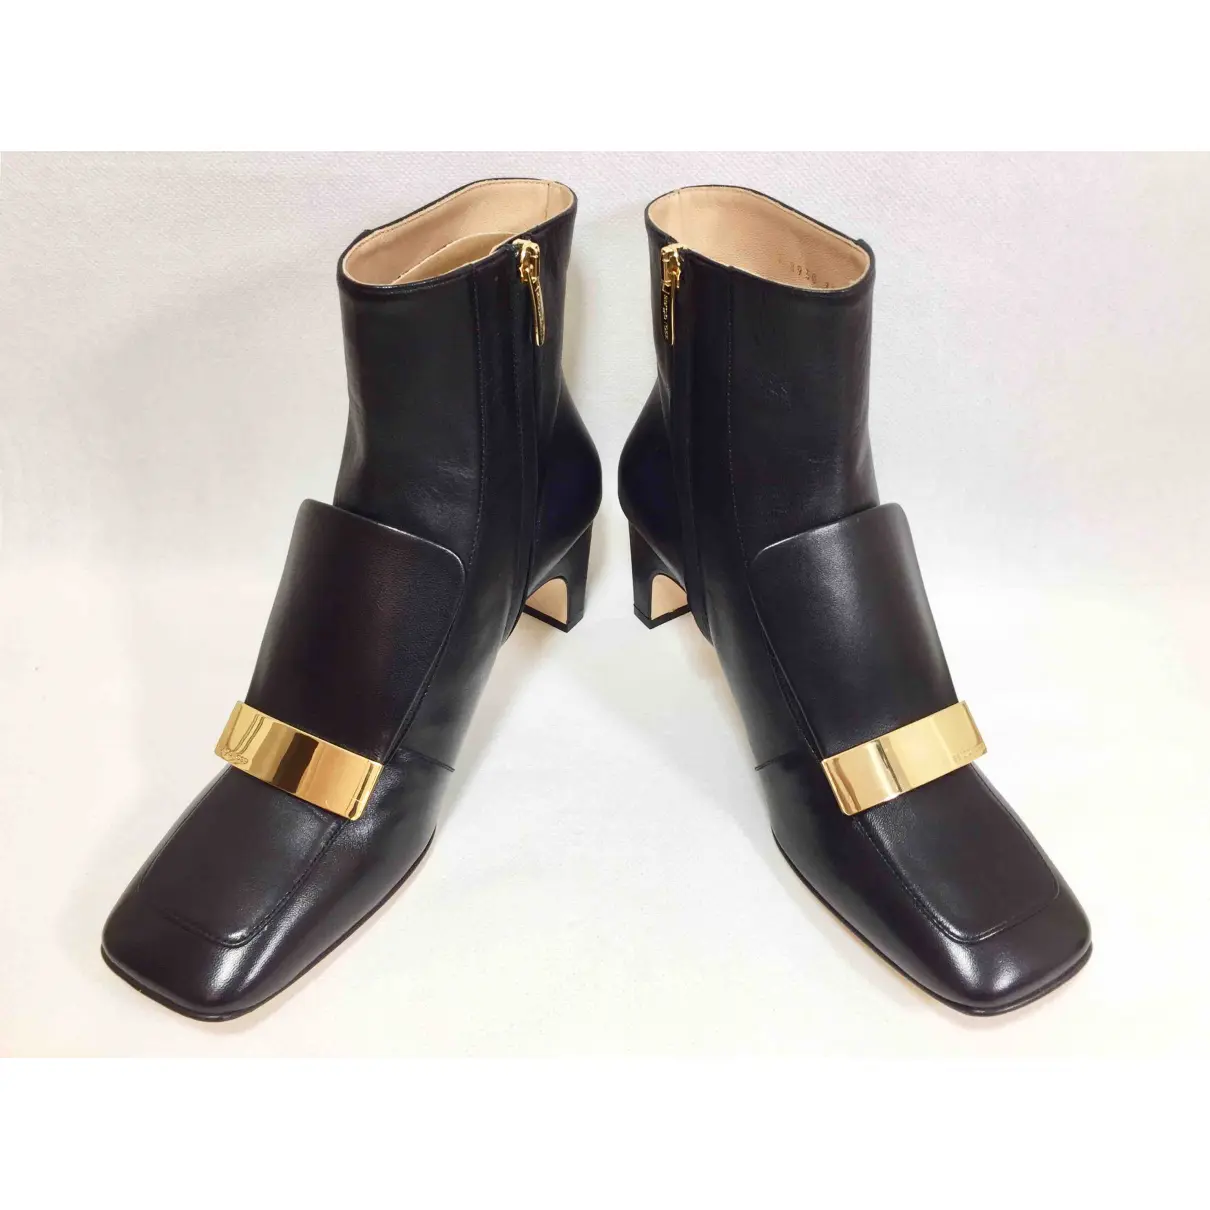 SR1 leather ankle boots Sergio Rossi